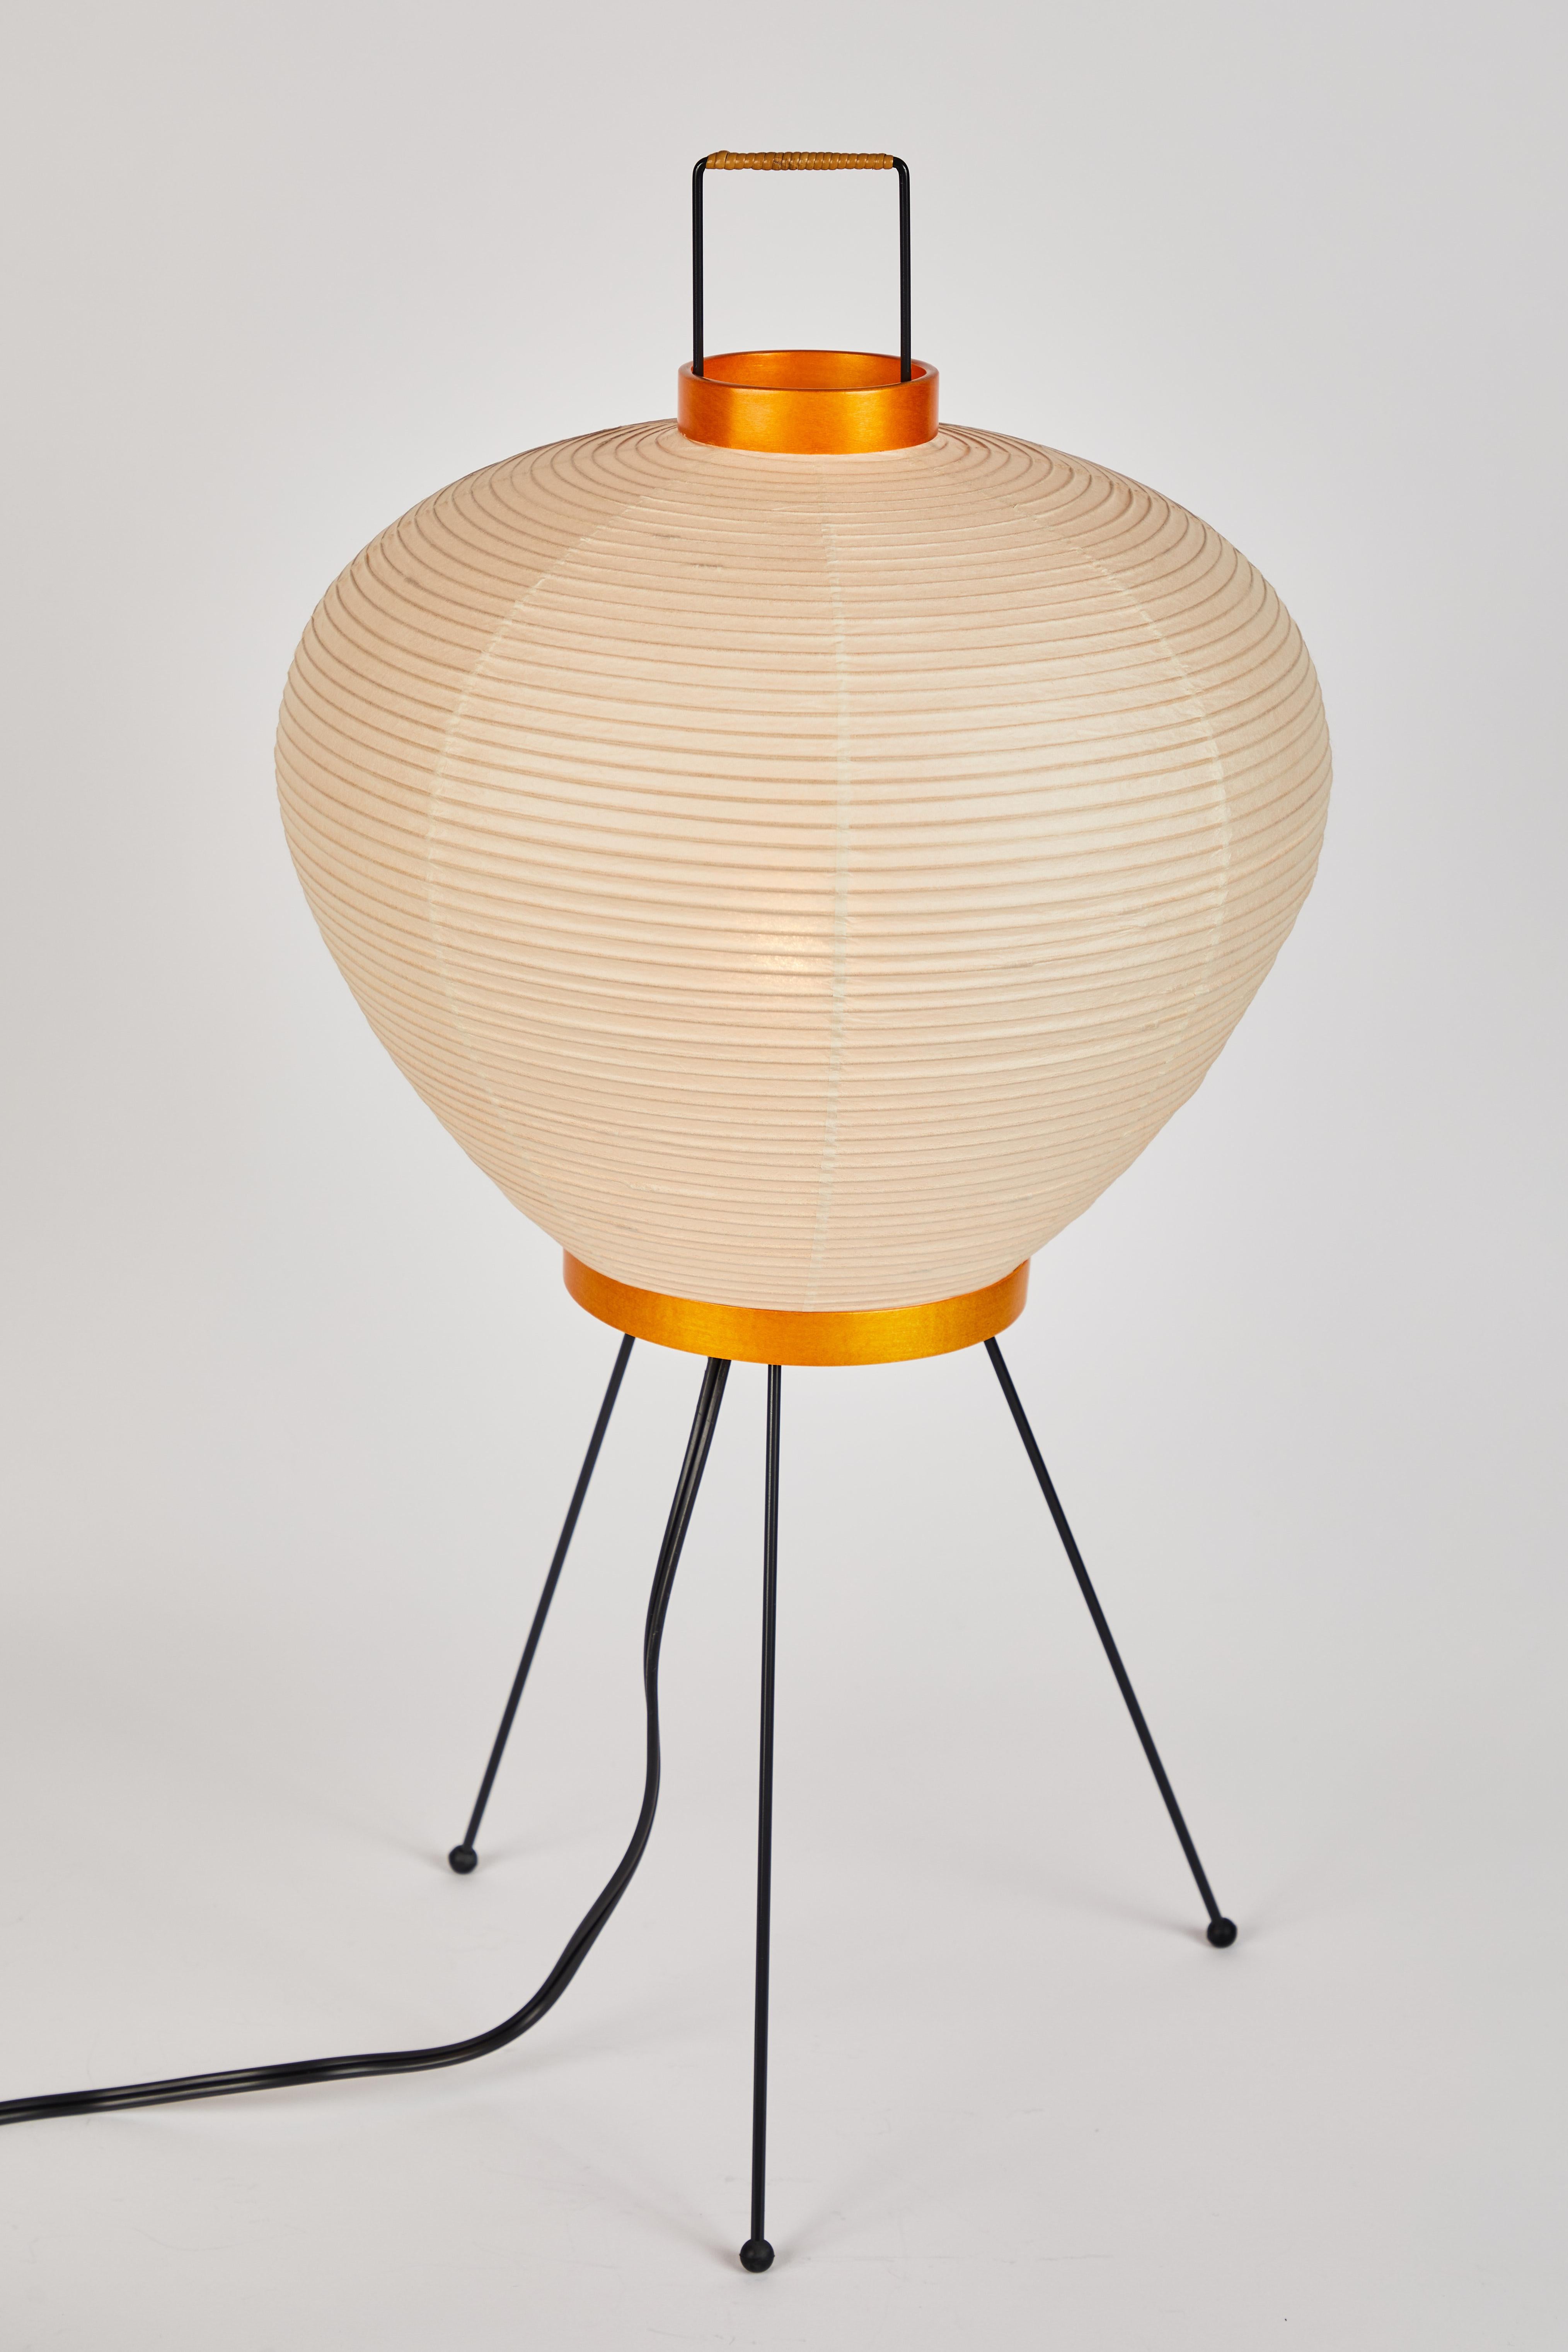 Akari Model 3A Light Sculpture by Isamu Noguchi In Excellent Condition For Sale In Glendale, CA